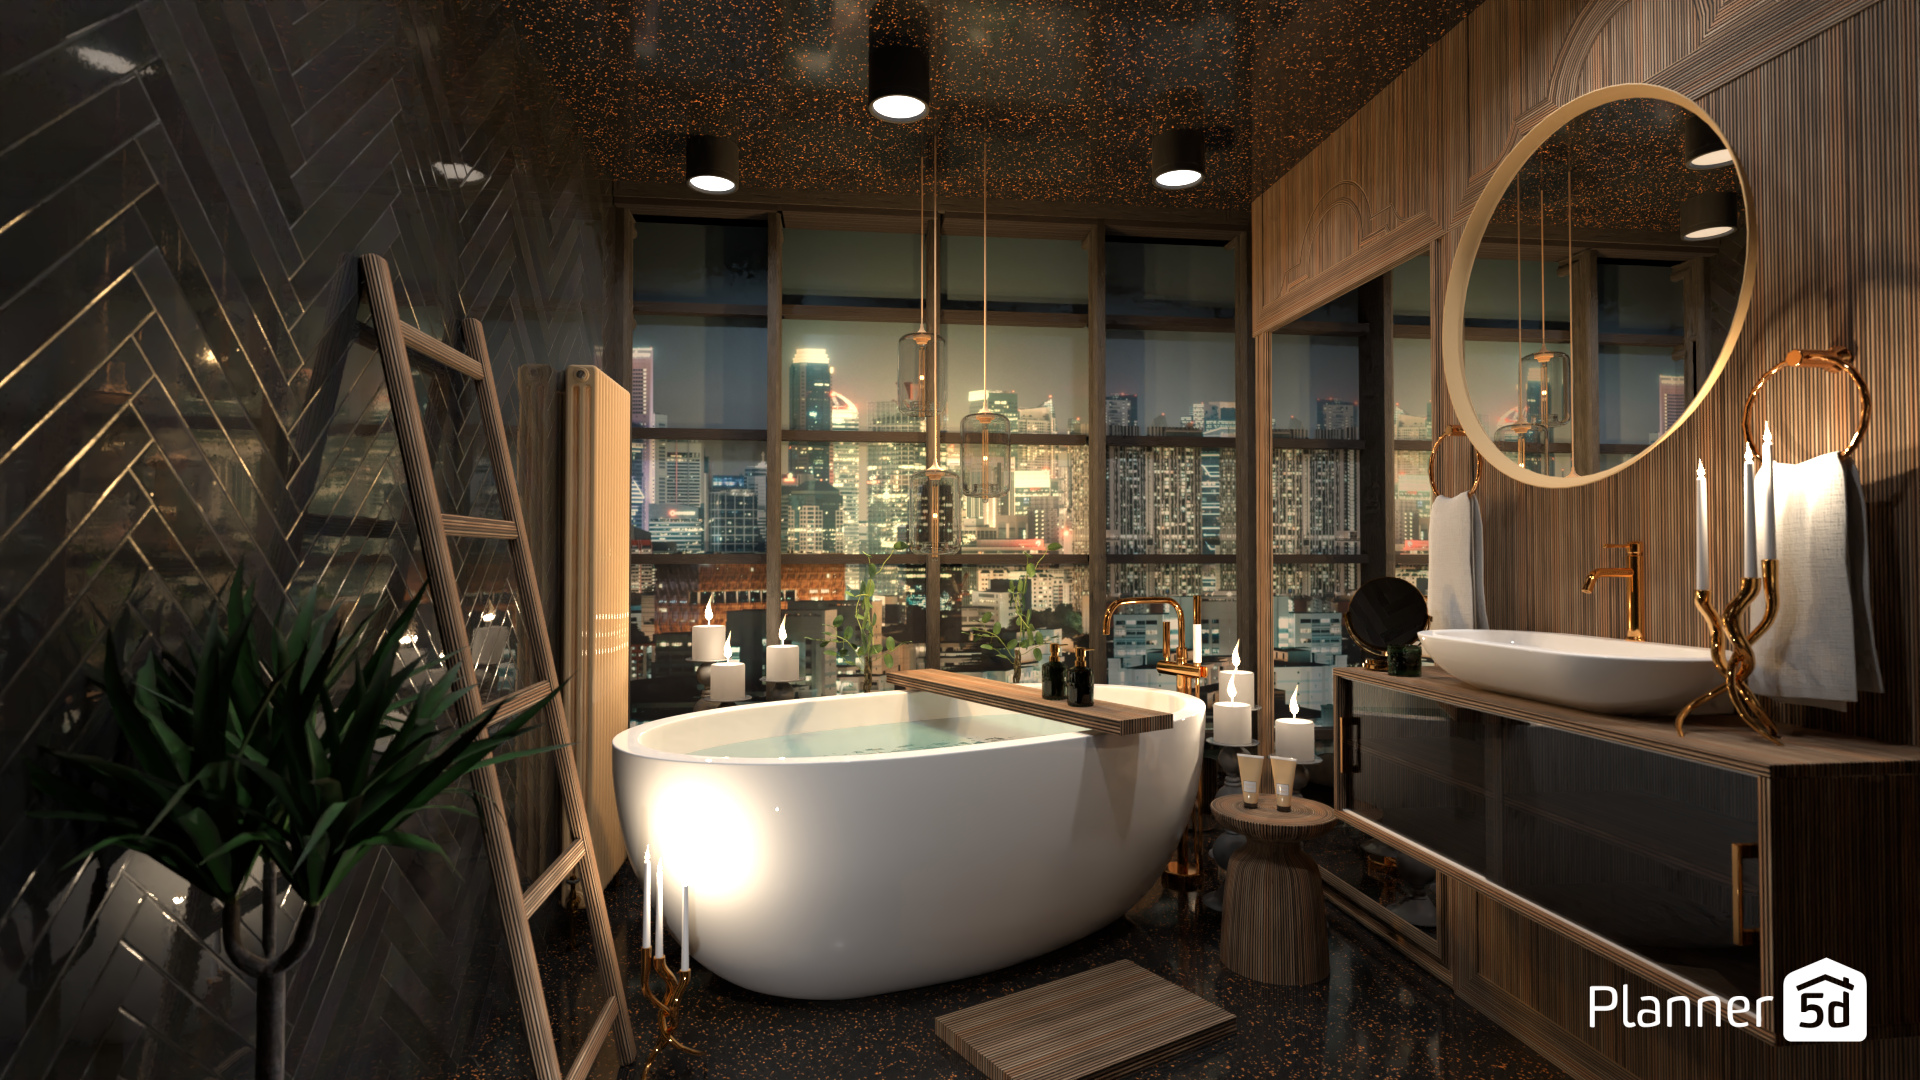 Upscale High Rise Bathroom In The City 19739076 by LLGrassy image